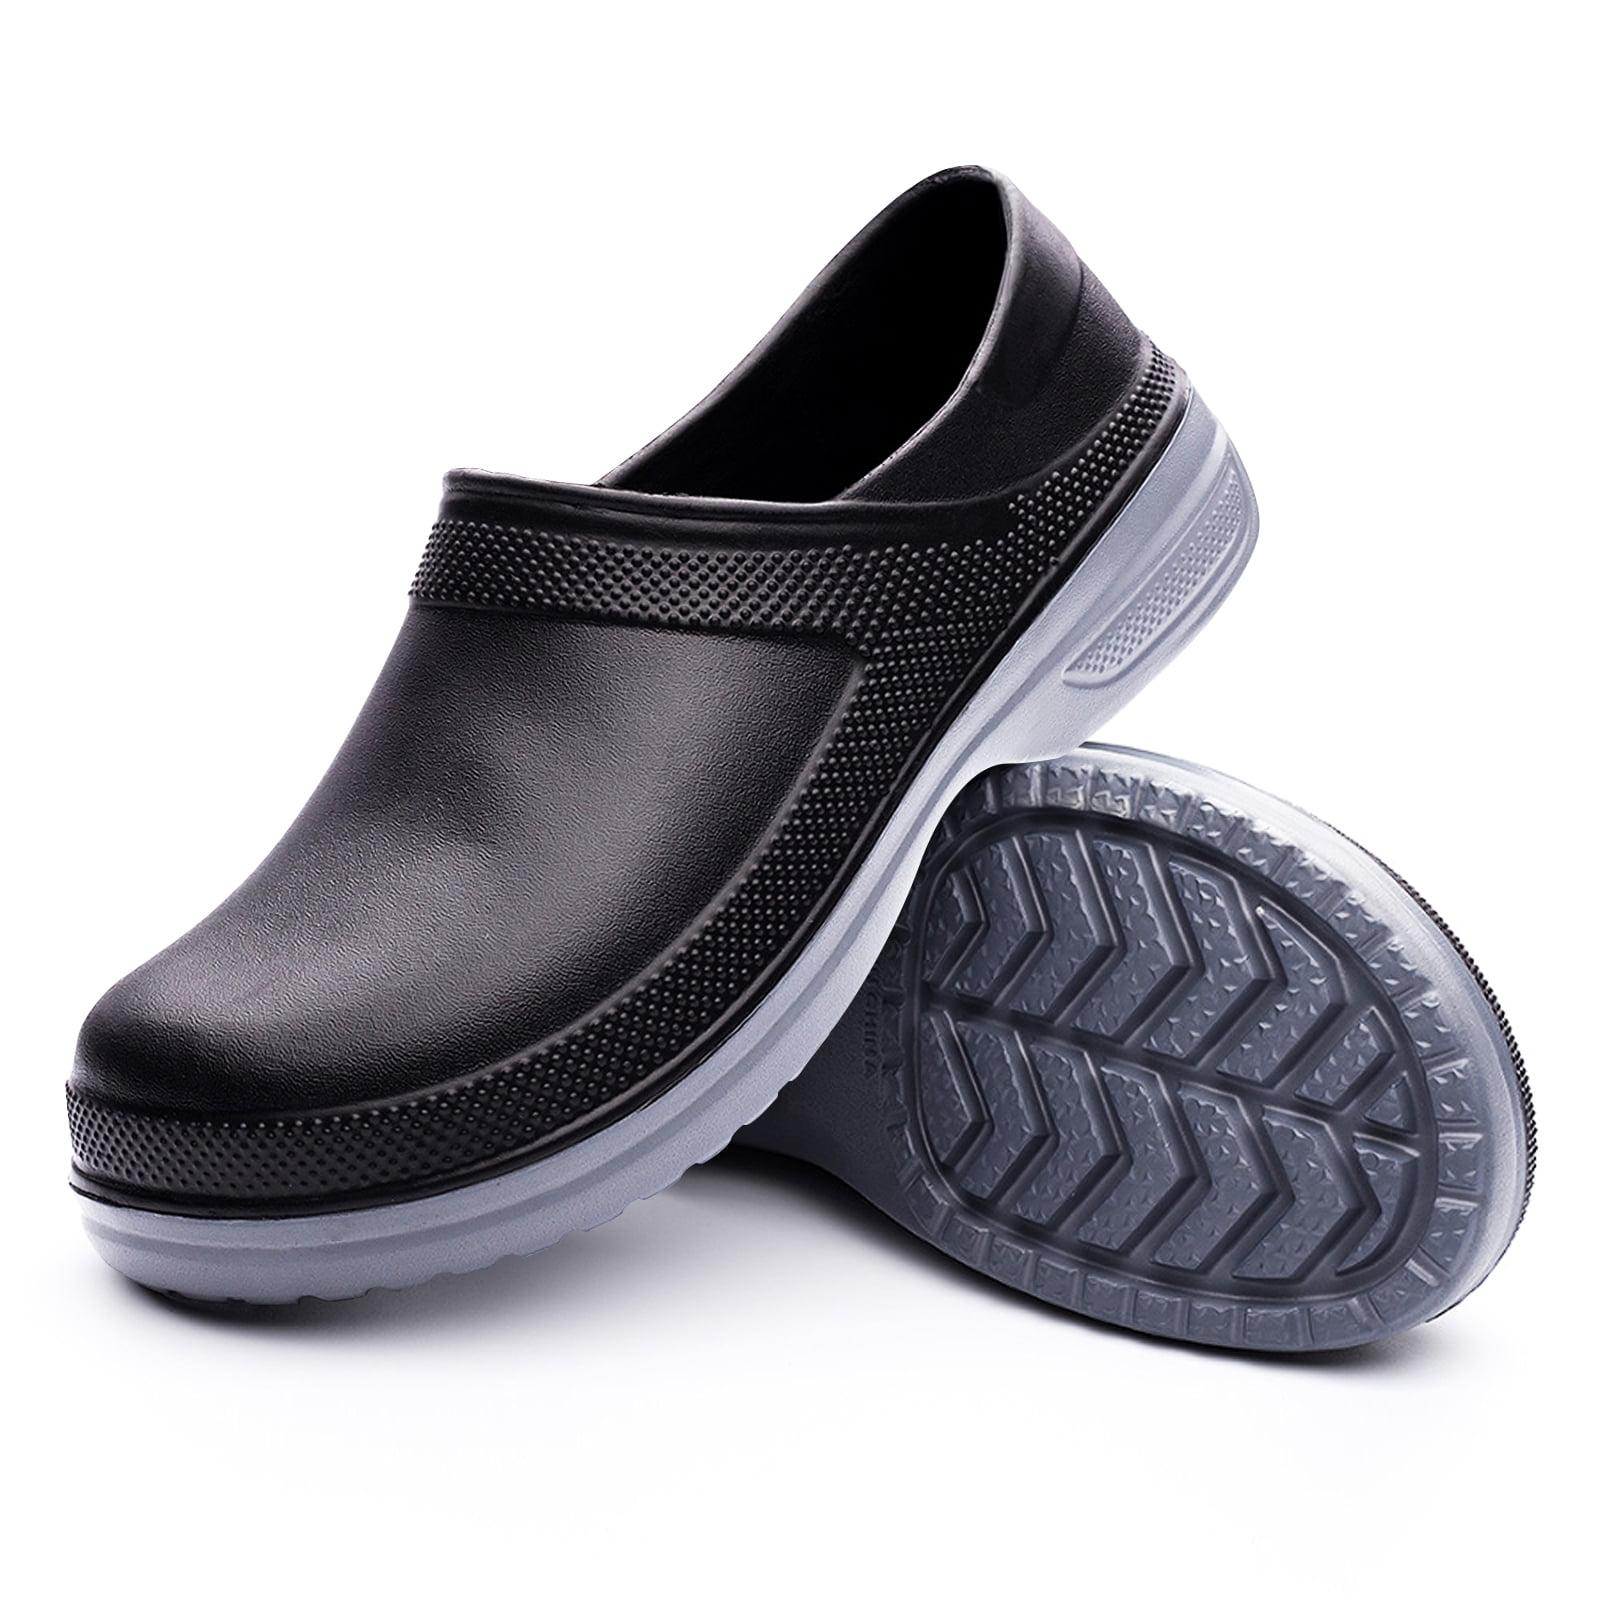 What are the Best Kitchen Shoes for Restaurants | National Event Supply